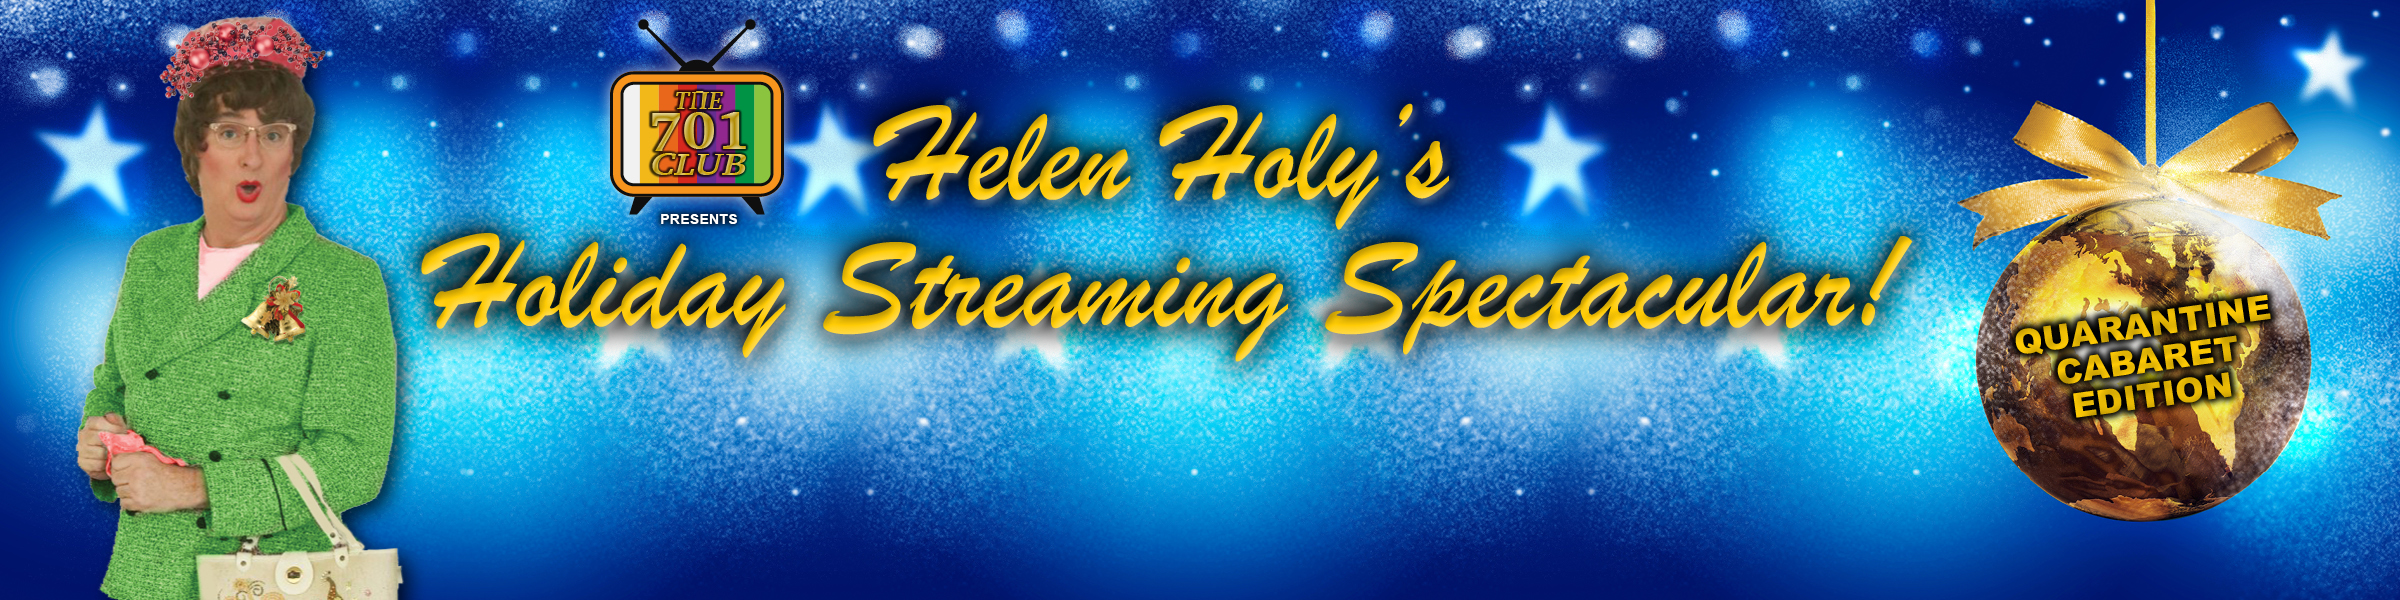 Helen Holy’s Holiday Streaming Spectacular